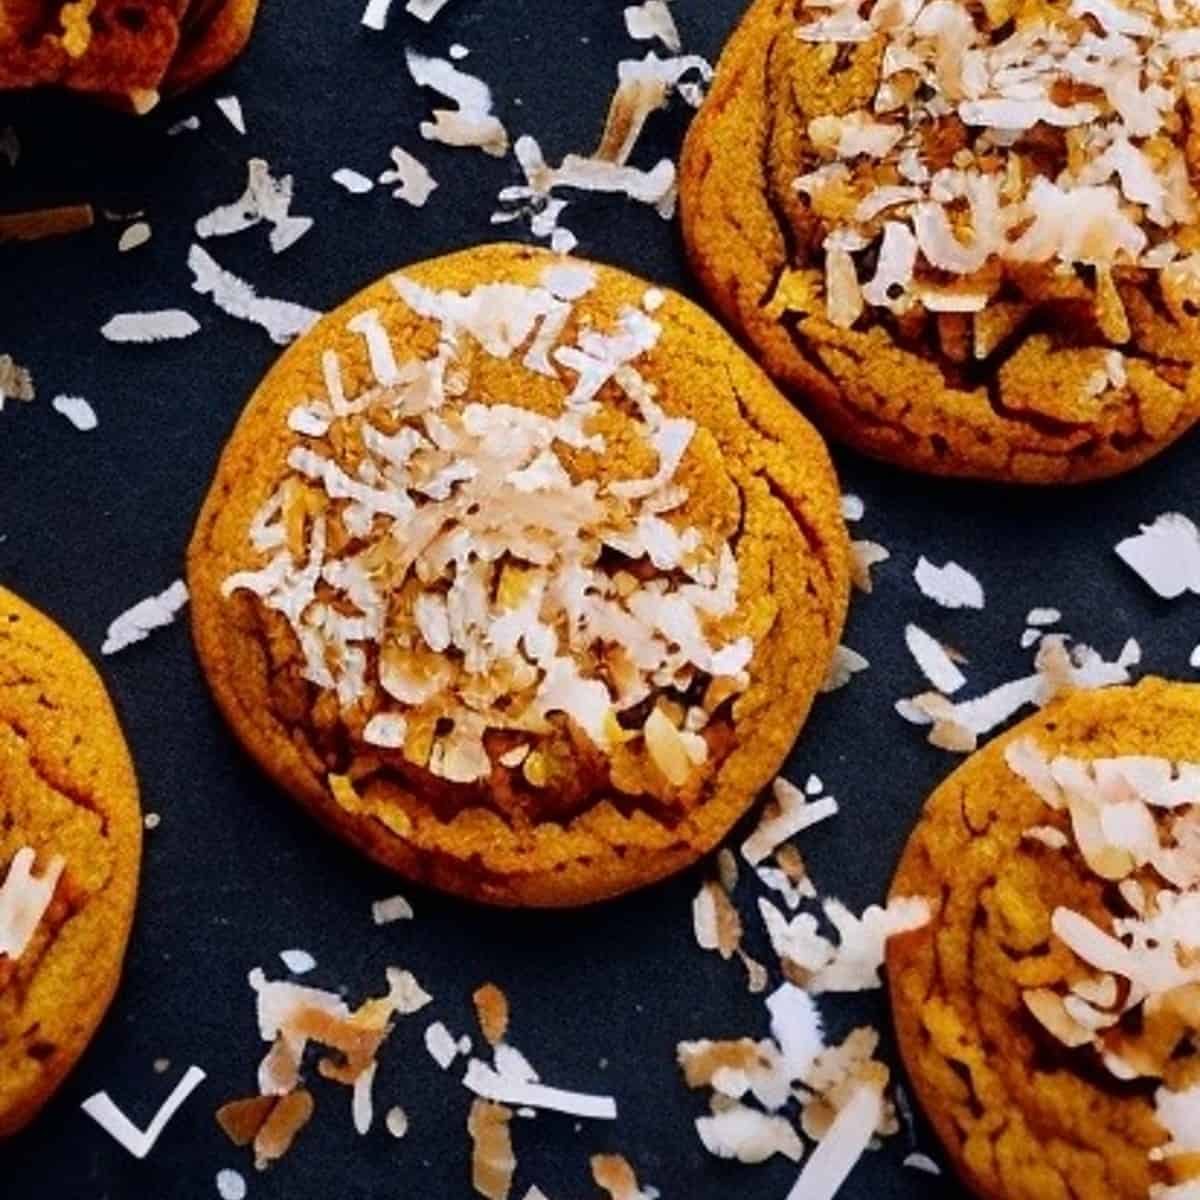 A close-up photo of several pumpkin coconut cookies on a white plate. The cookies are round and golden brown, with cracks on the surface. They are sprinkled with shredded coconut